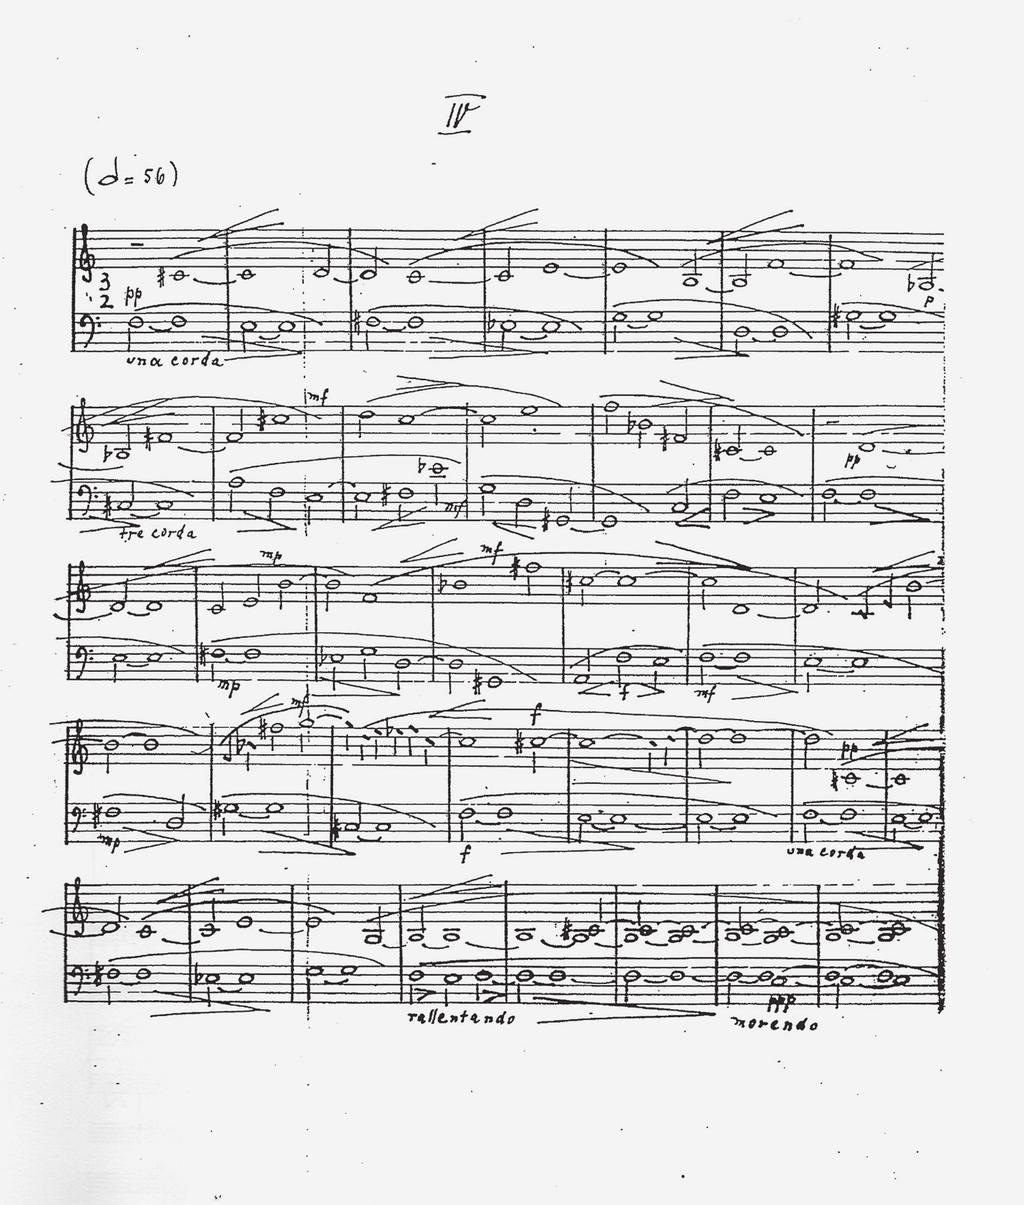 johanna beyer New York Waltzes: Works for Piano 34 Dissonant Counterpoint IV, piano; manuscript held in the Music Division, New York Public Library for the Performing Arts.